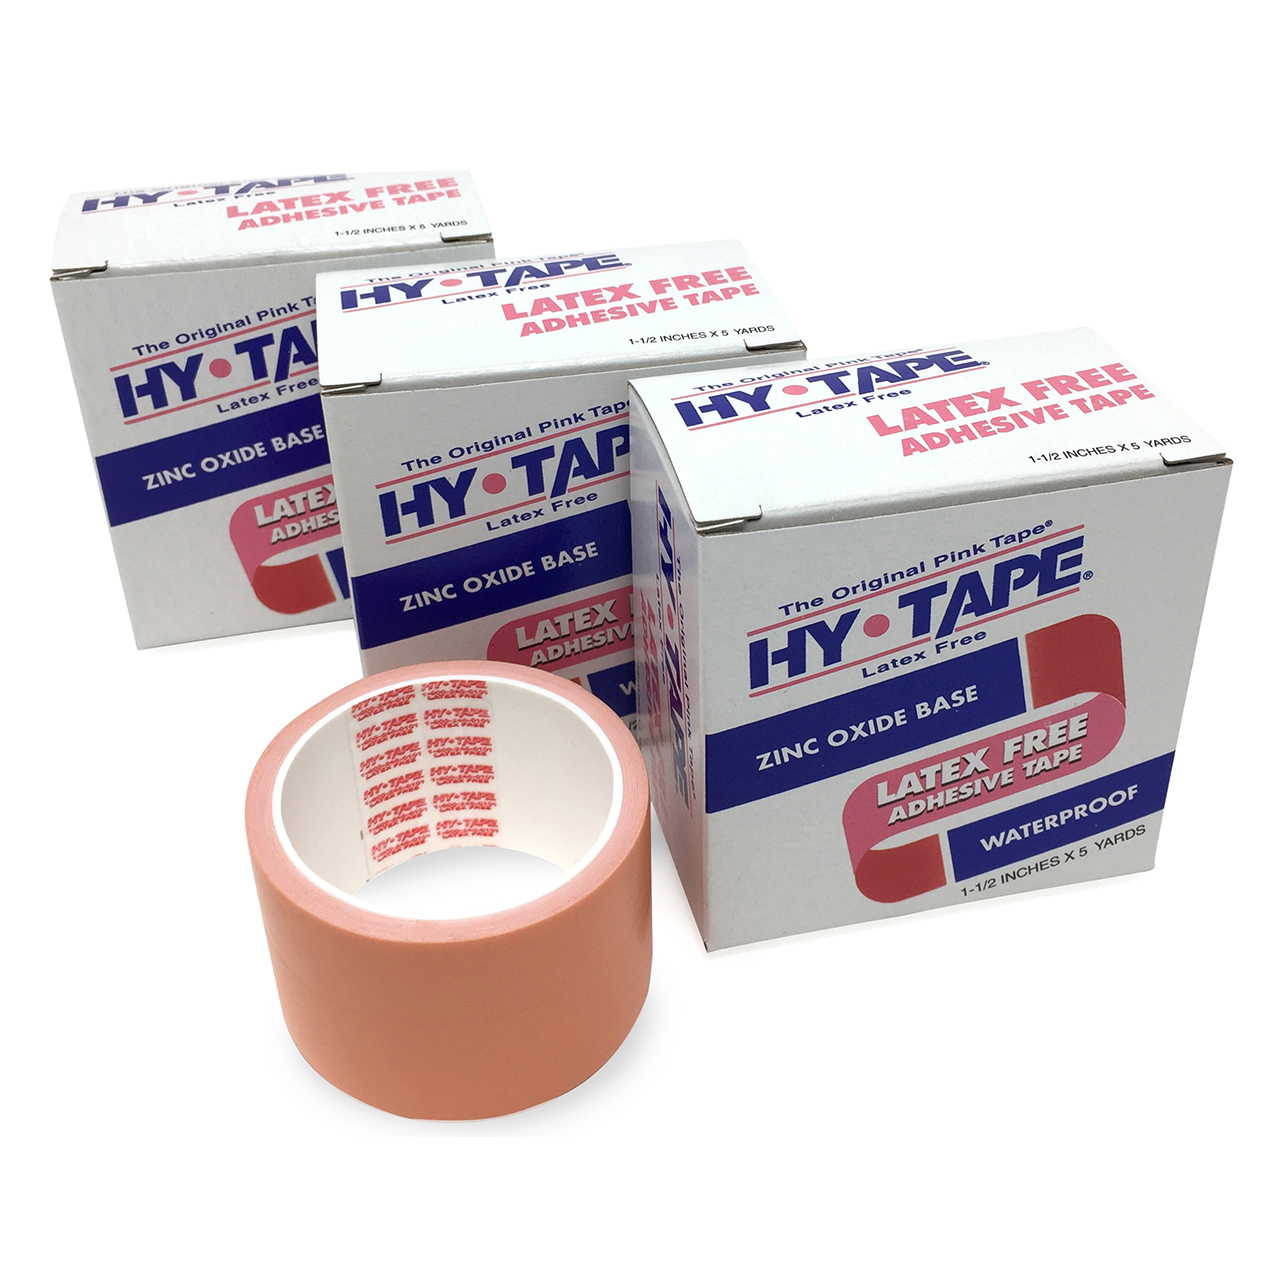 Tape Won't Stick – Factors That Influence Medical Tape Adhesion - Hy-Tape  International, Inc.